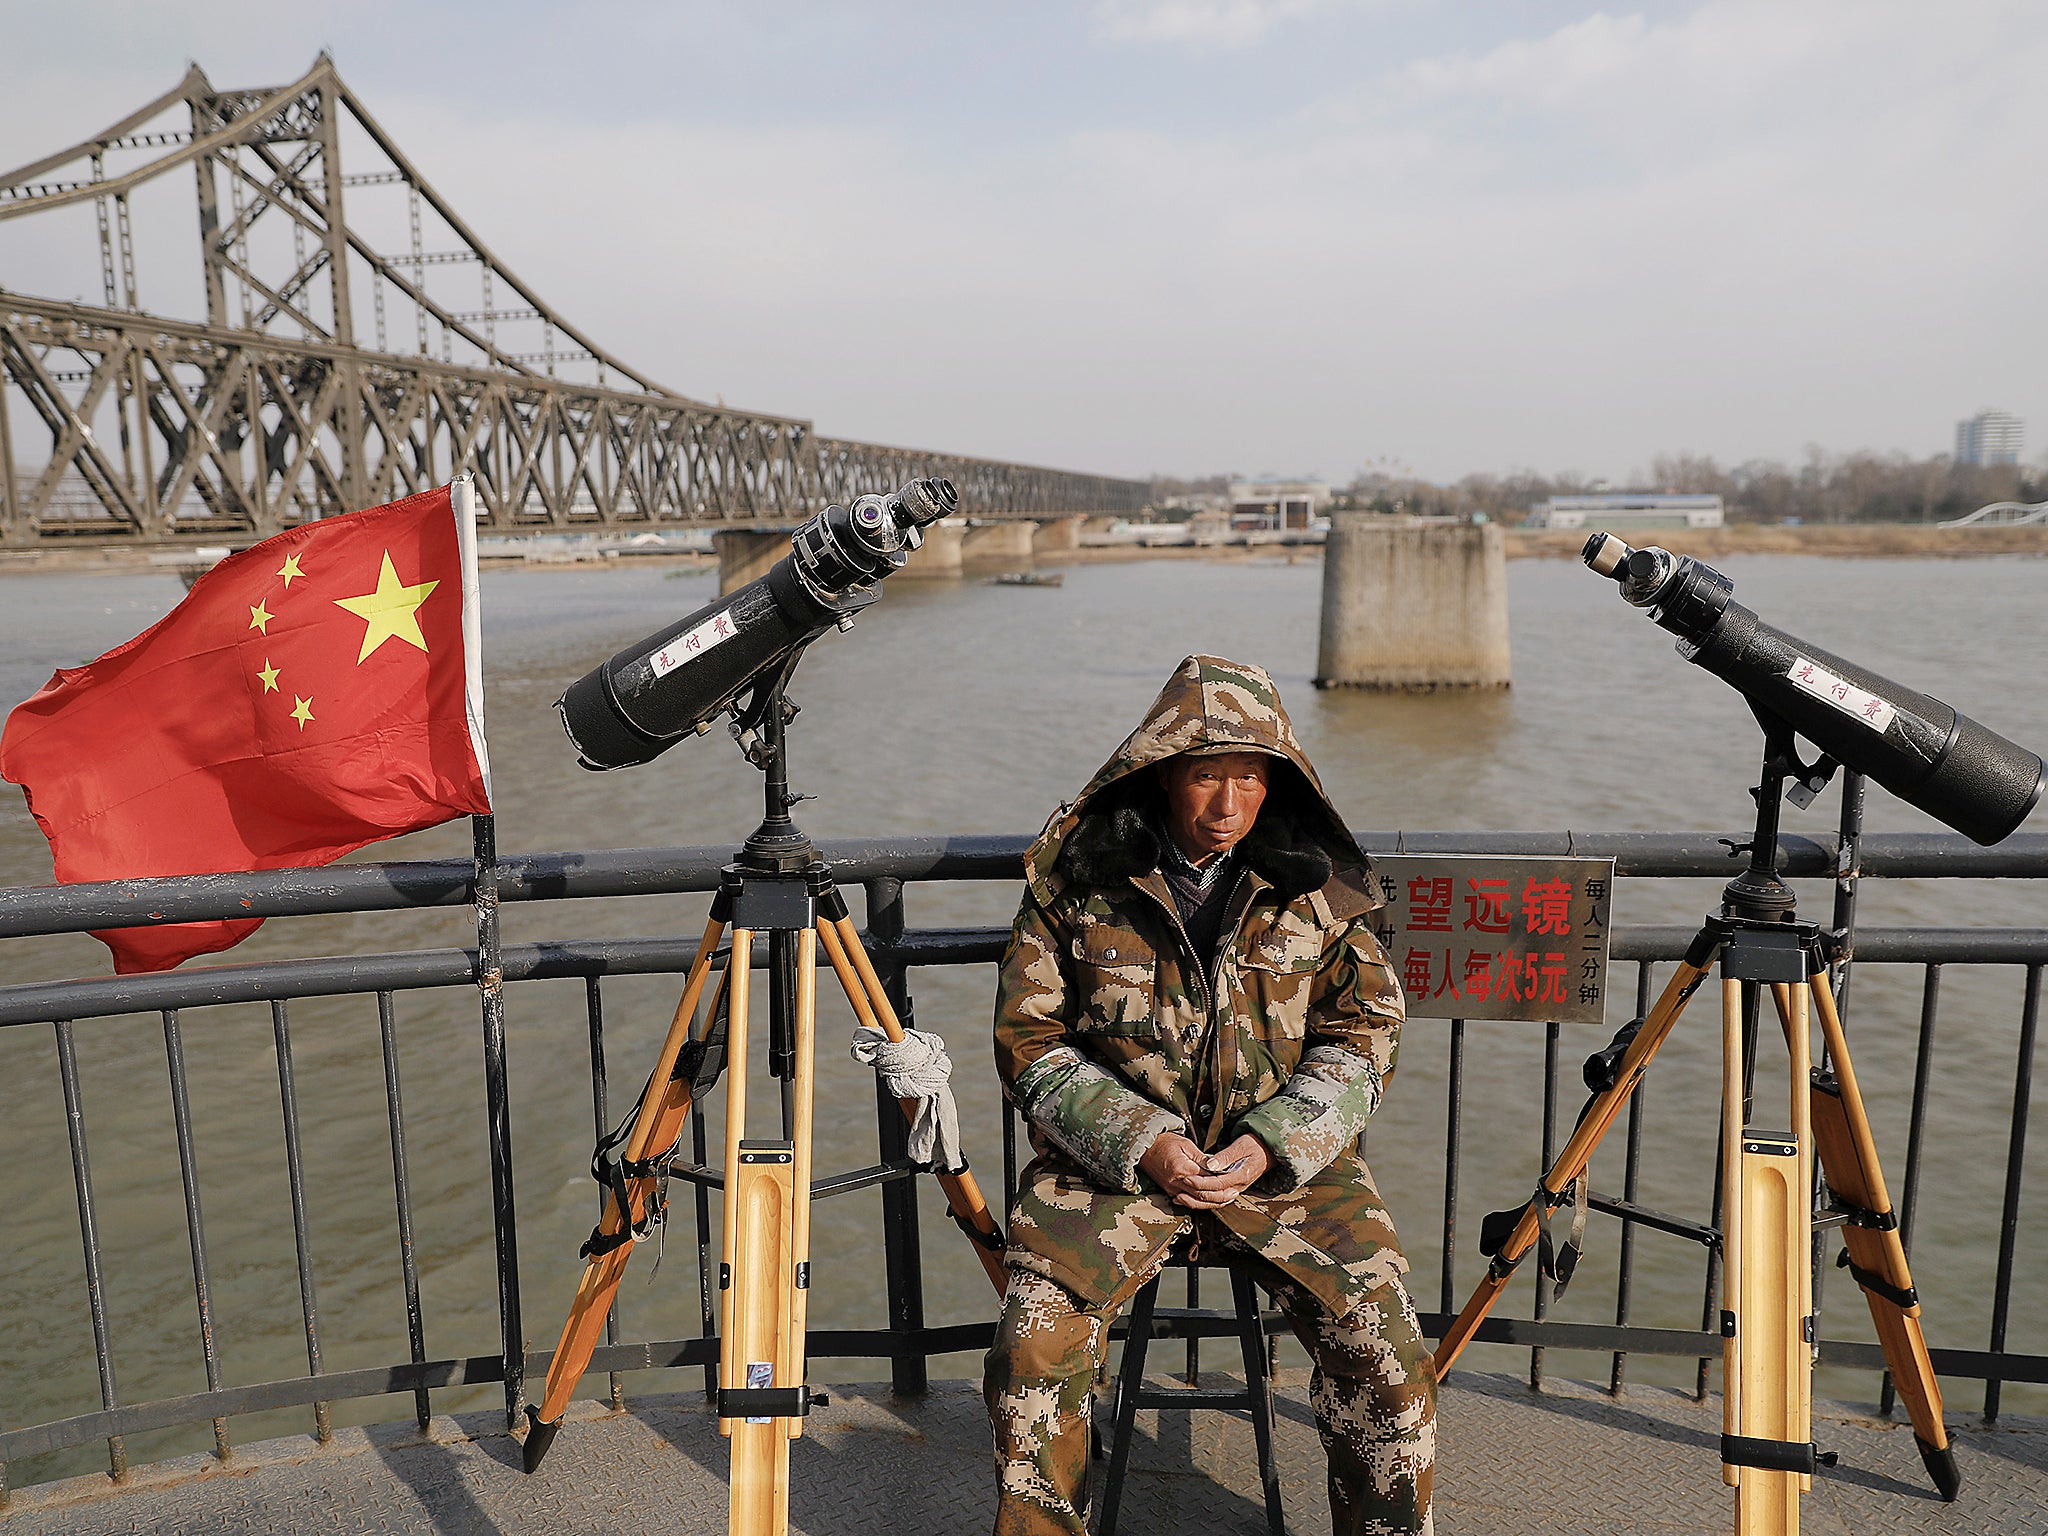 File: A man sits between binoculars he offers to tourists to watch the North Korean side of the Yalu River from the Broken Bridge, bombed by the US forces in the Korean War and now a tourist site, in Dandong, China's Liaoning province. The bridge connects China’s Dandong New Zone to North Korea’s Sinuiju